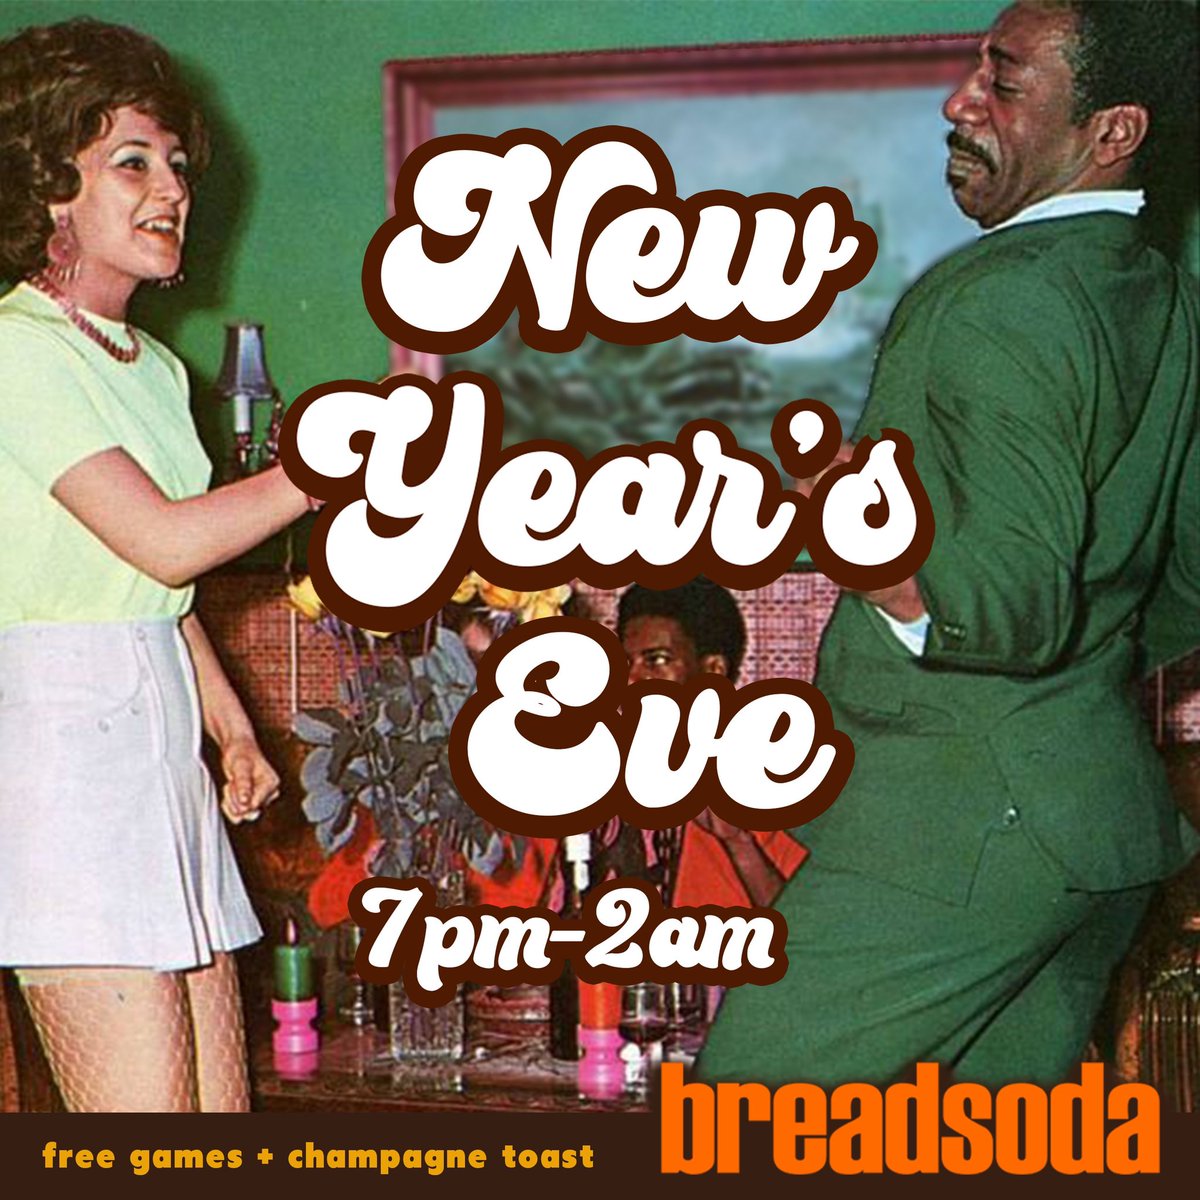 NEW YEARS EVE🎉🥳 *FREE GAMES(POOL & SHUFFLE, DARTS & BOARD GAMES)🎱 *NO COVER💰 *COMPLIMENTARY CHAMPAGNE TOAST🥂🍾 *DOORS 7PM .